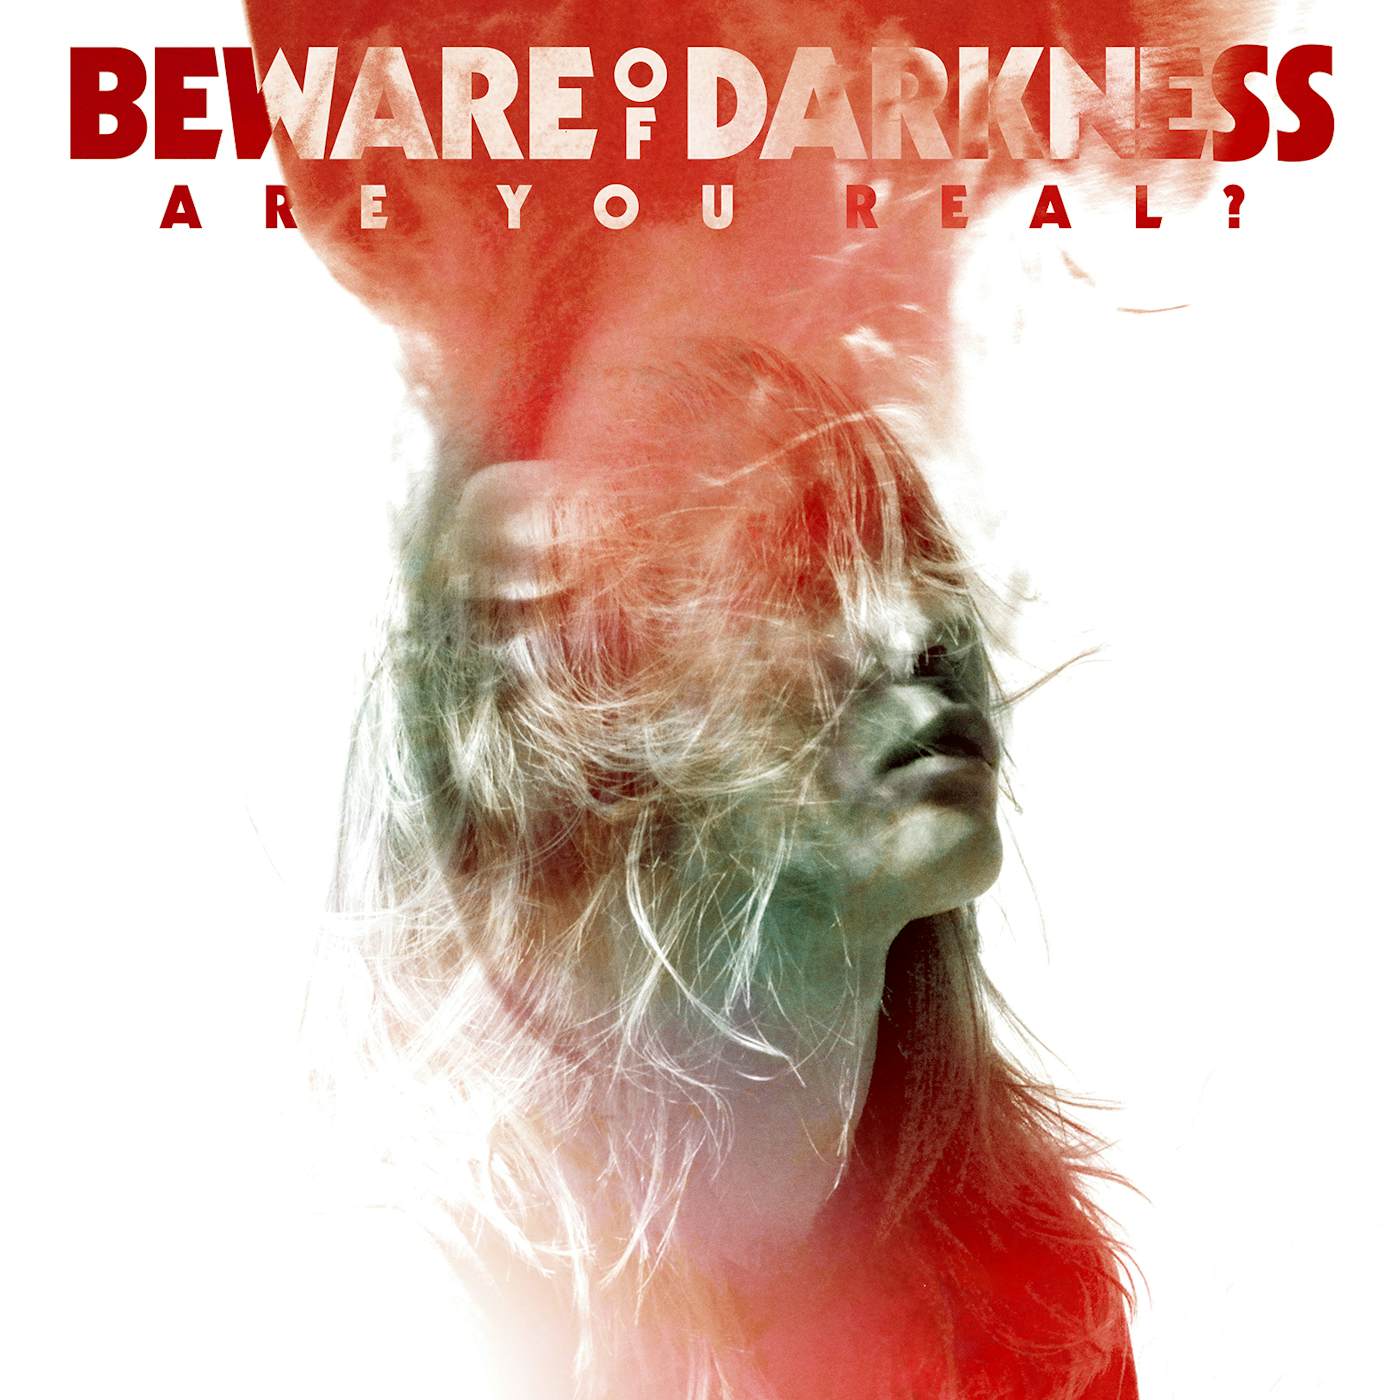 Beware Of Darkness ARE YOU REAL CD